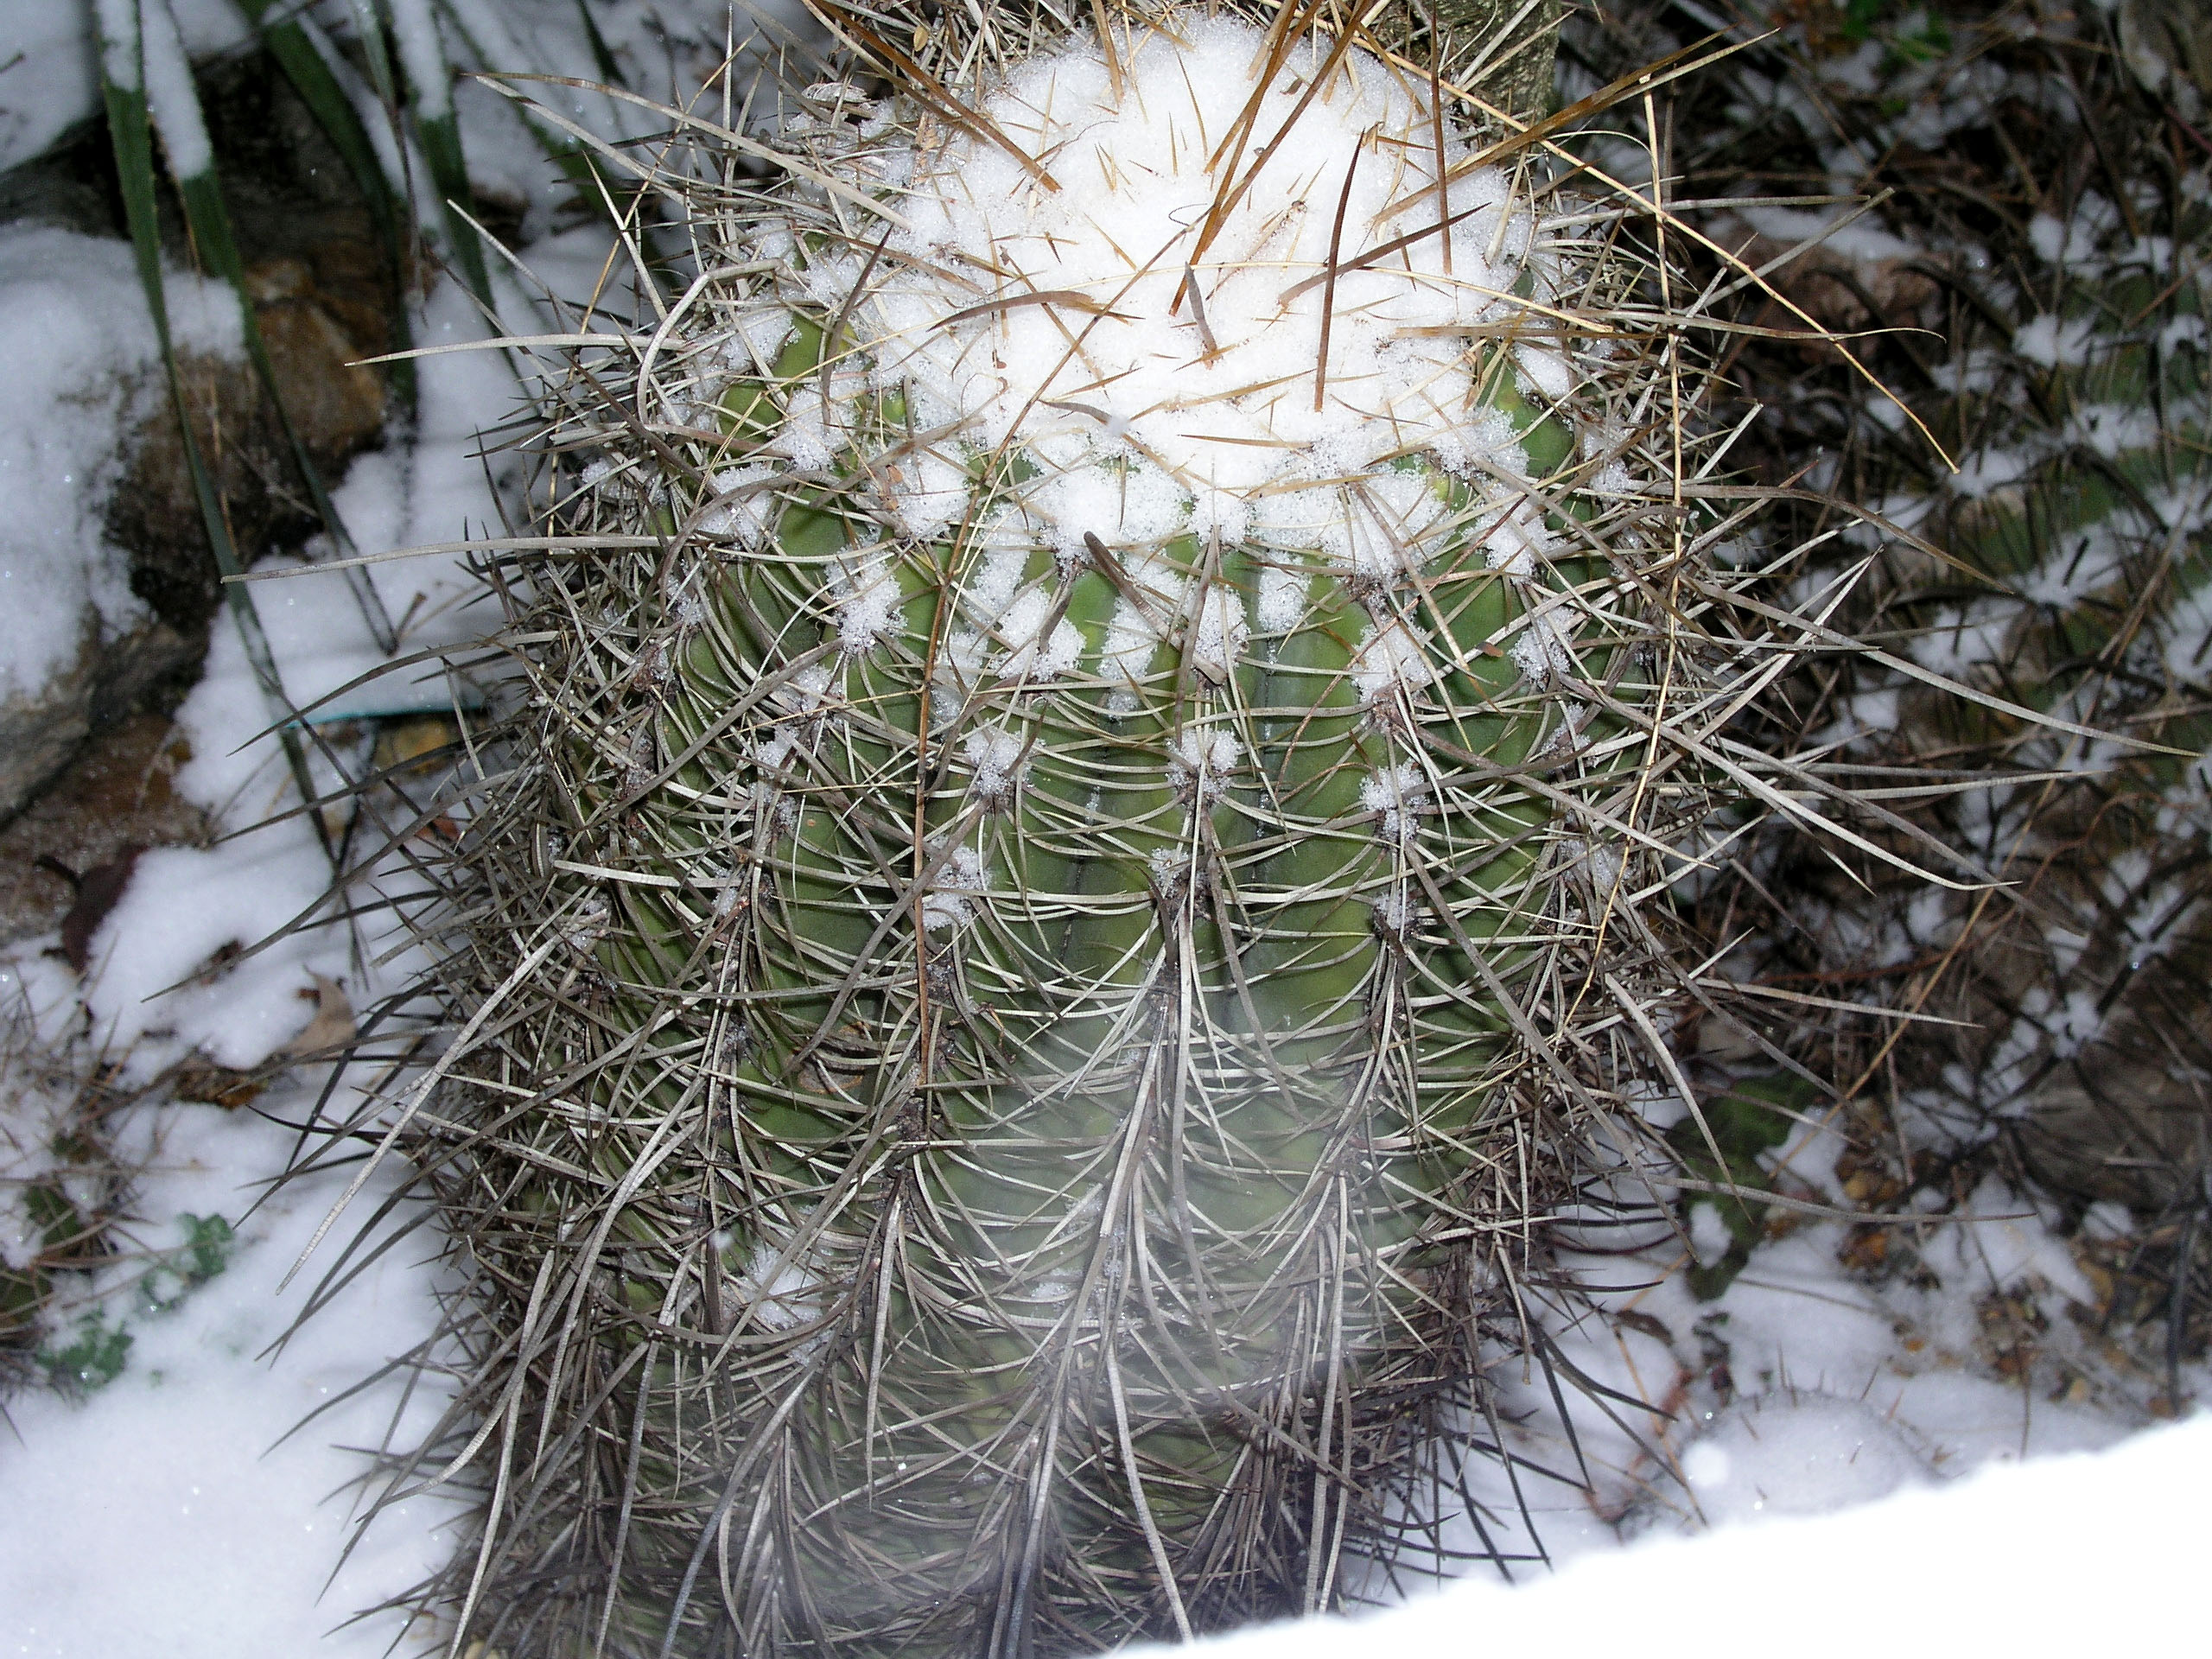 trichocereus_pasacana_just_before_and_during_cold_wave_winter_2006_2007.jpg